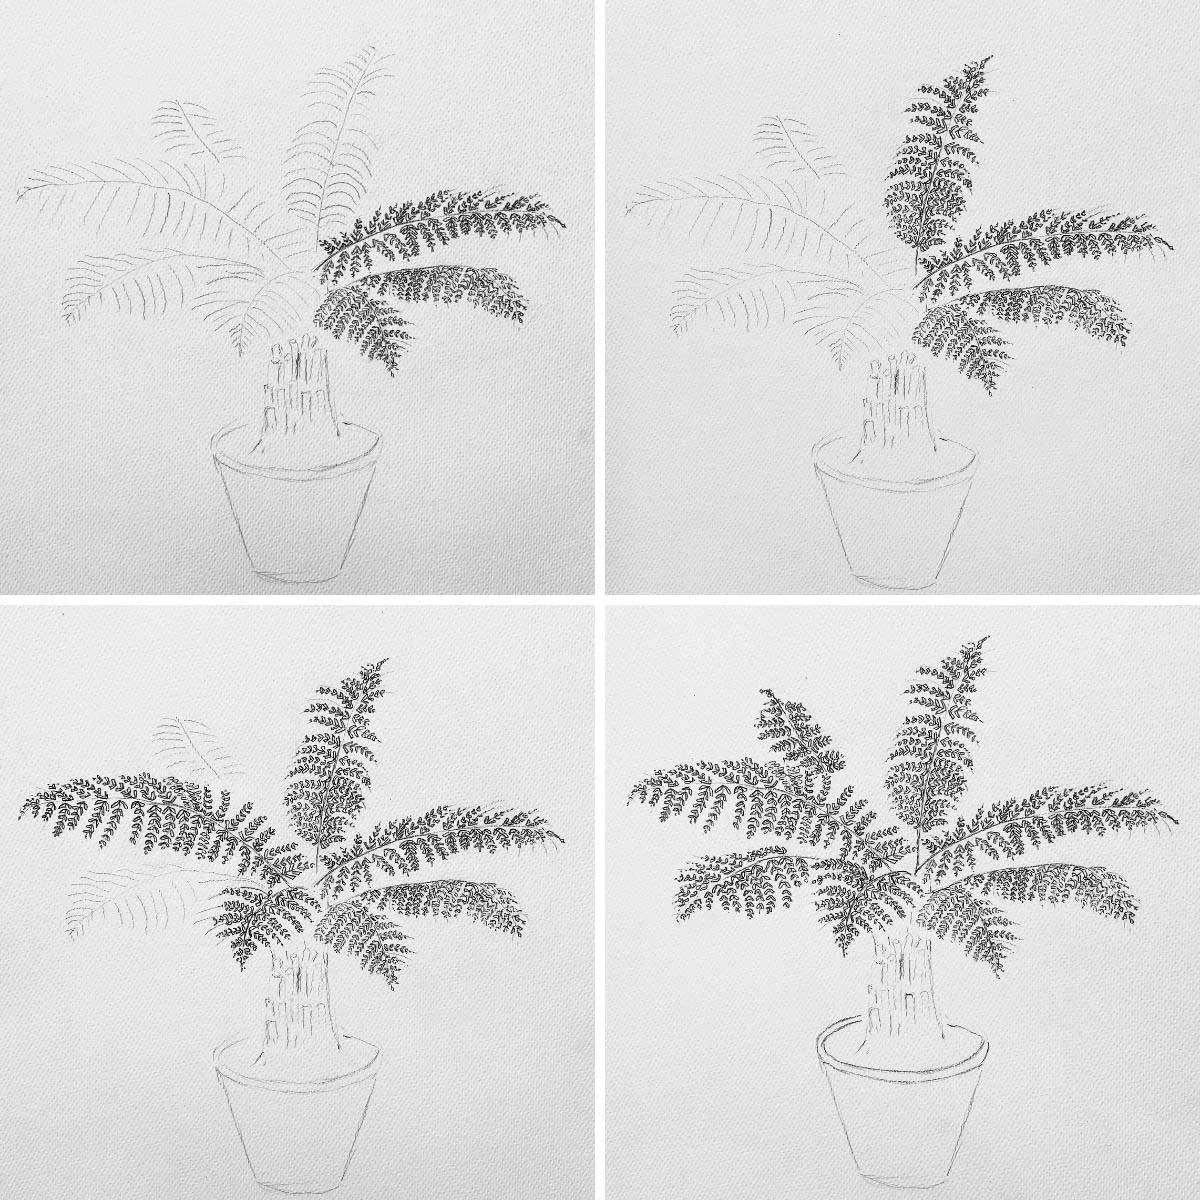 potted tree fern steps in sketching this plants details